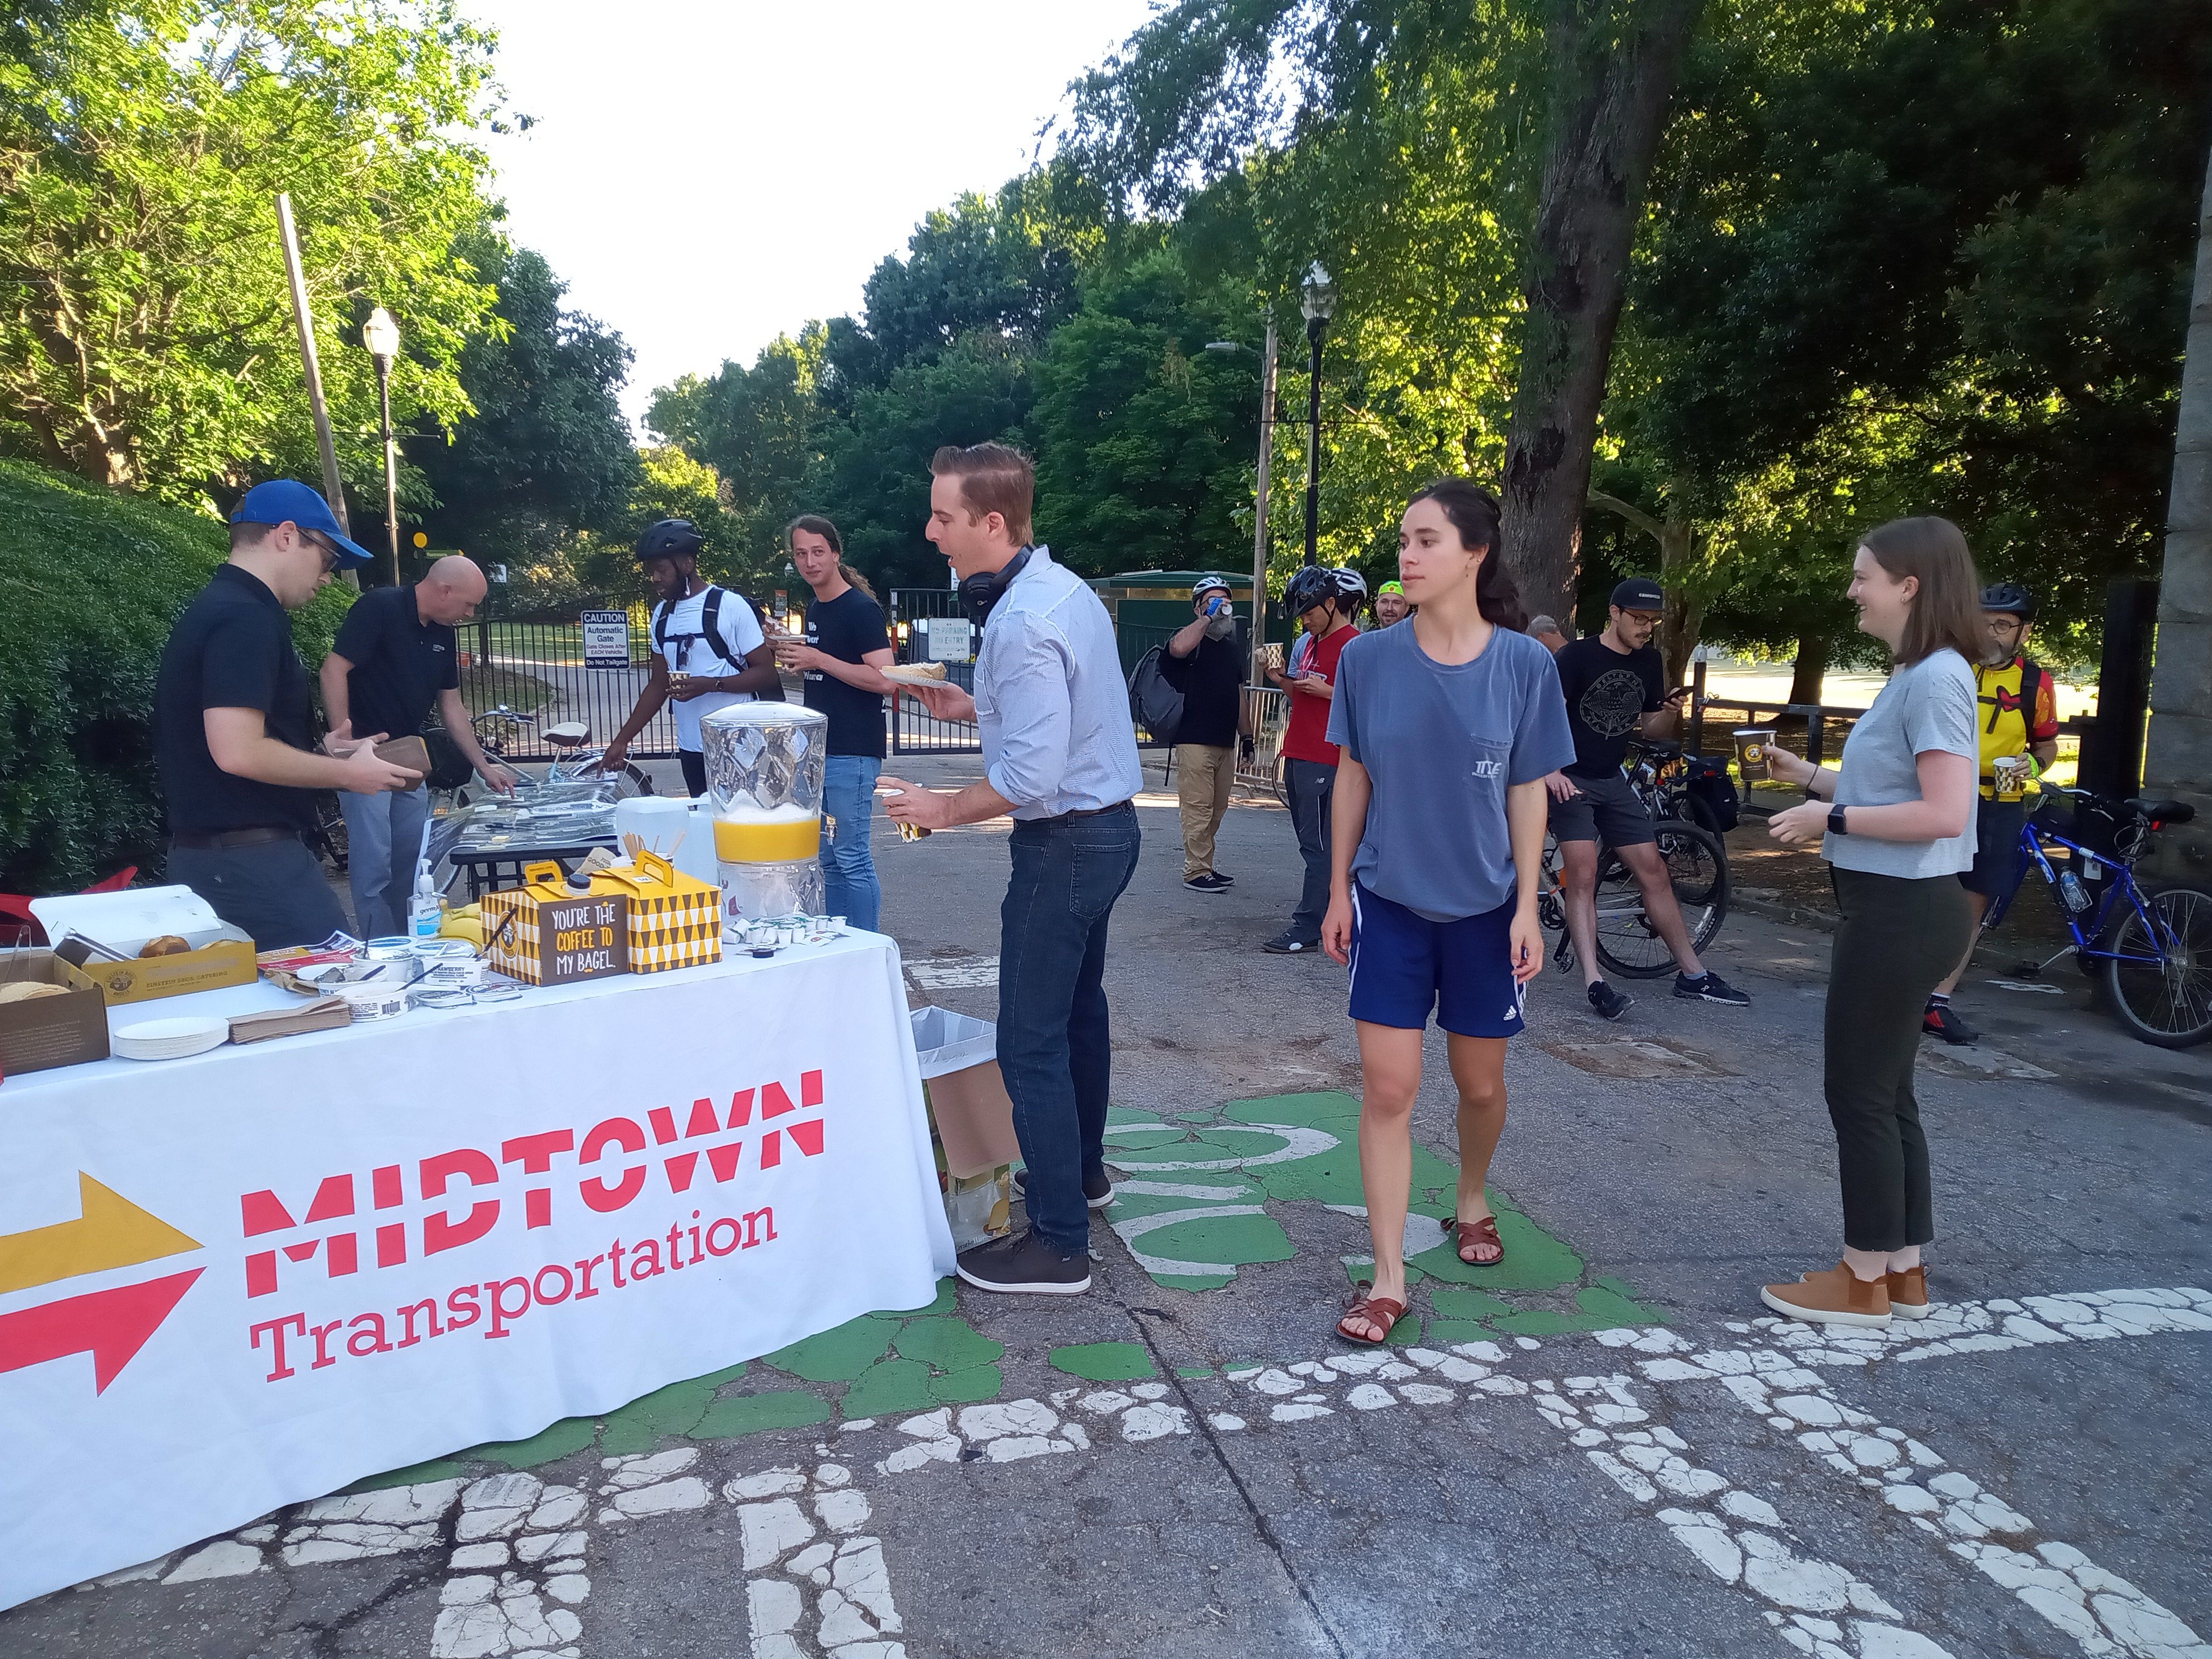 Attendees eat complementary breakfast and learn about upcoming bike infrastructure plans